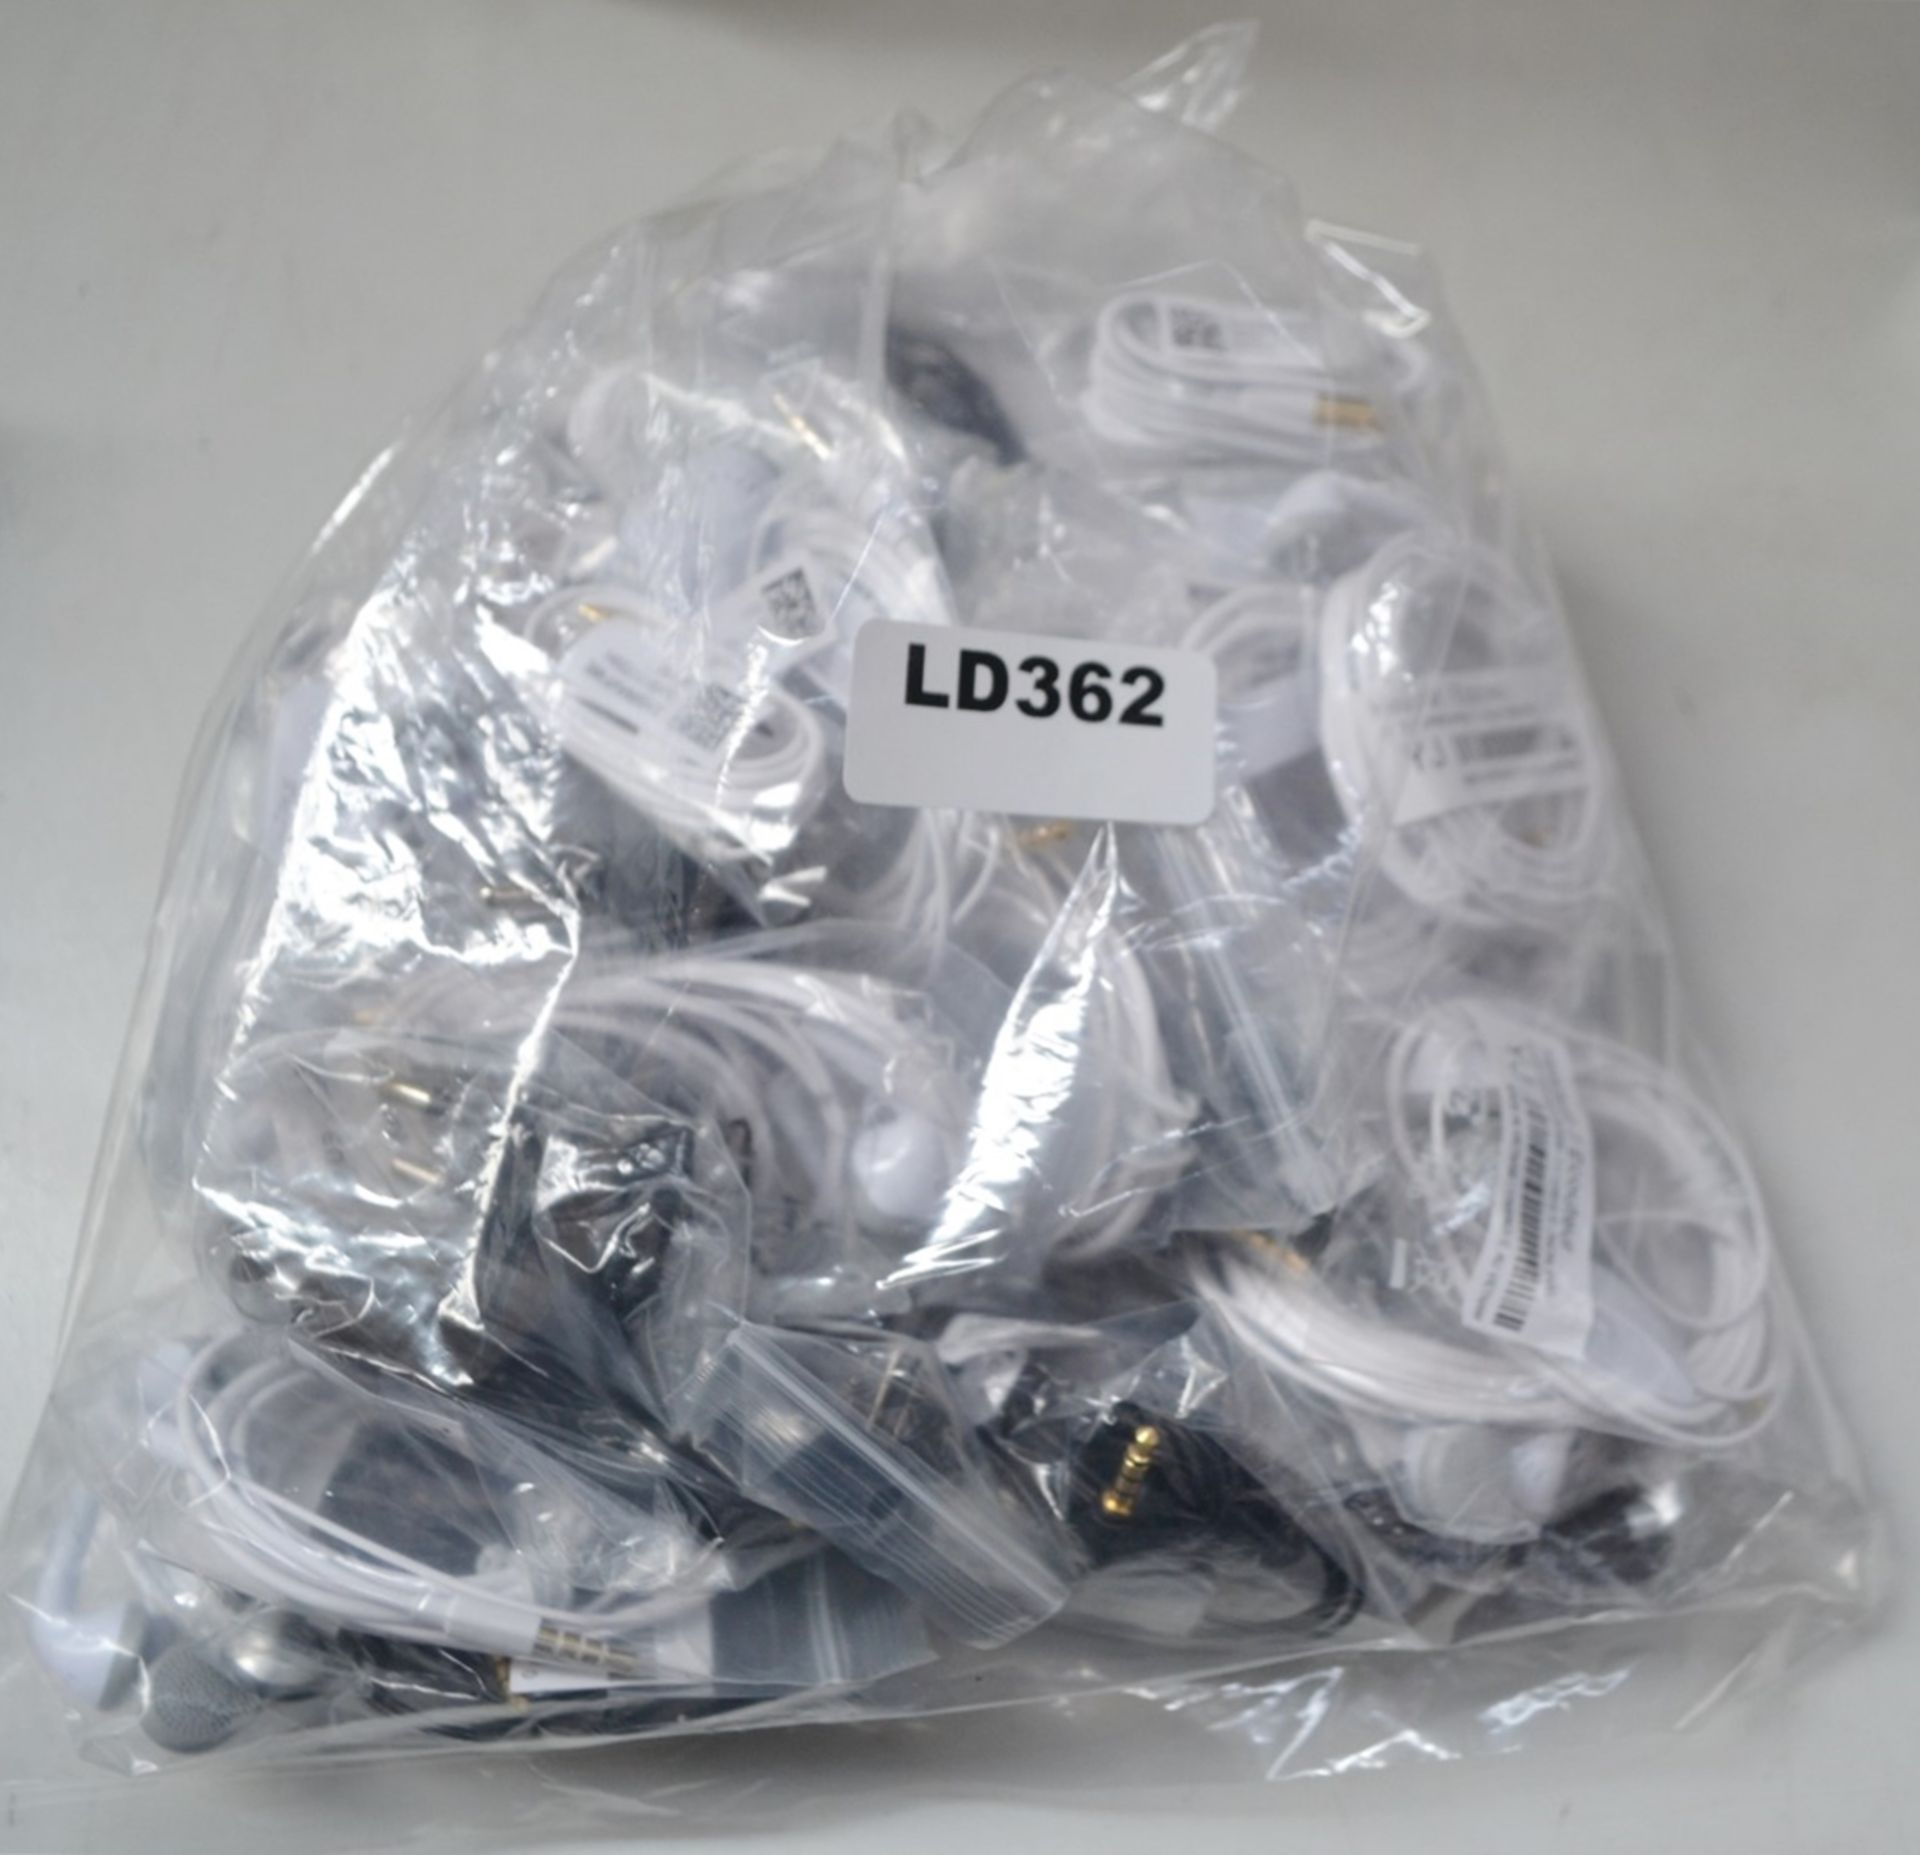 Approximately 50 Pairs Of Samsung Earphones - Ref: LD362 - CL409 - Altrincham WA14